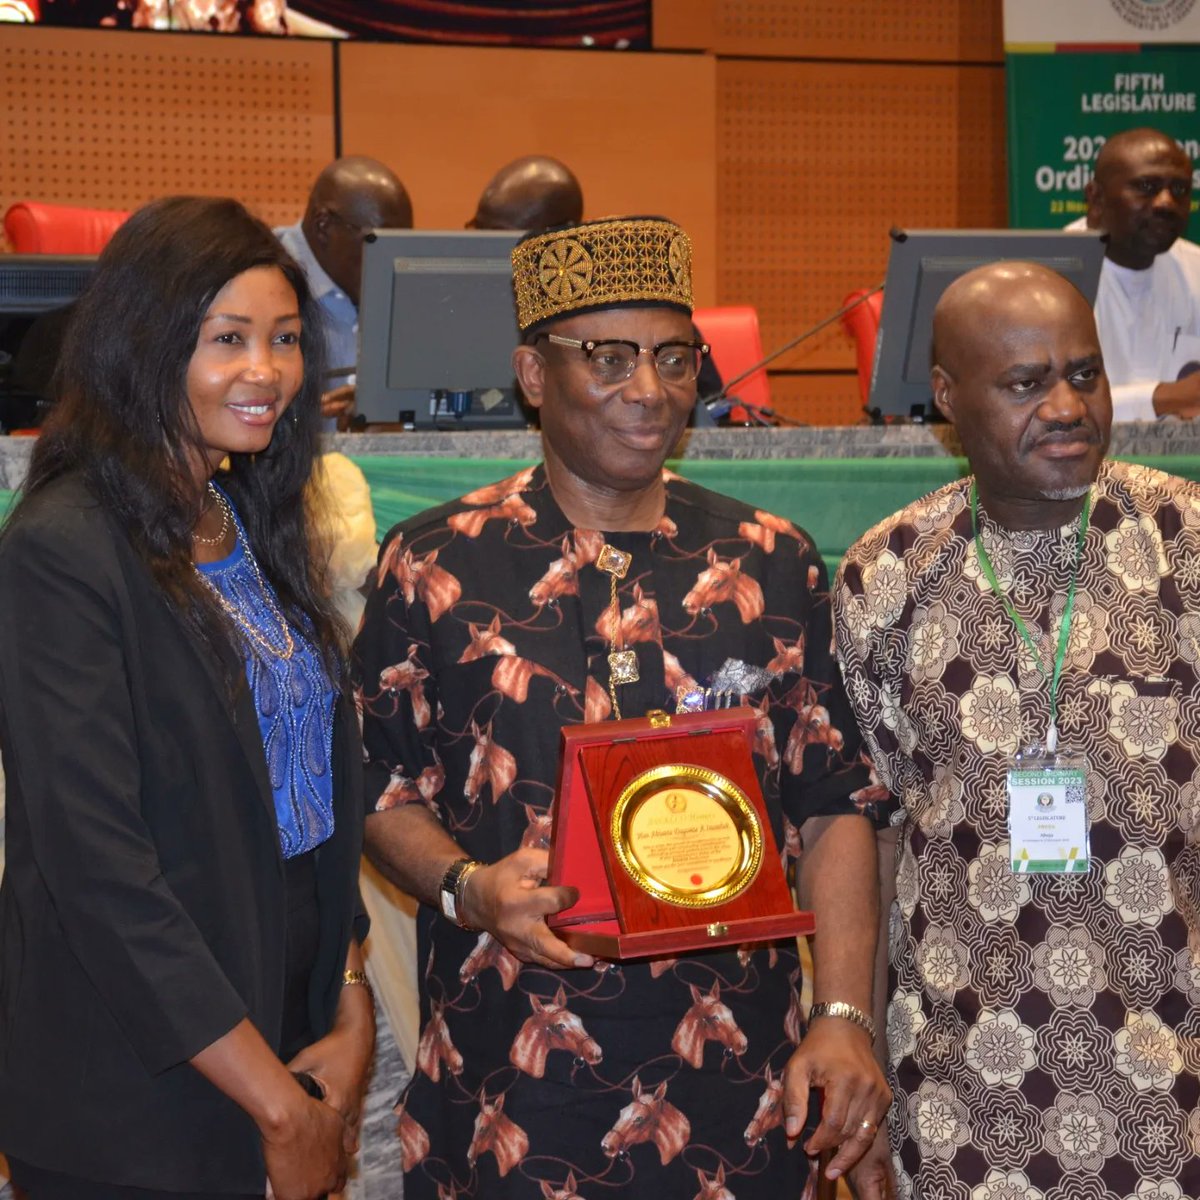 AWALCO present awards to the Hon. Speaker of the ECOWAS Parliament, Rt. Hon. Sidie Mohamed Tunis, Hon. Fatoumata Njie, Hon. Awaji-Inombek Abiante, and Hon. Abdoulaye Vilan for their Outstanding performance in the 5th Legislature.